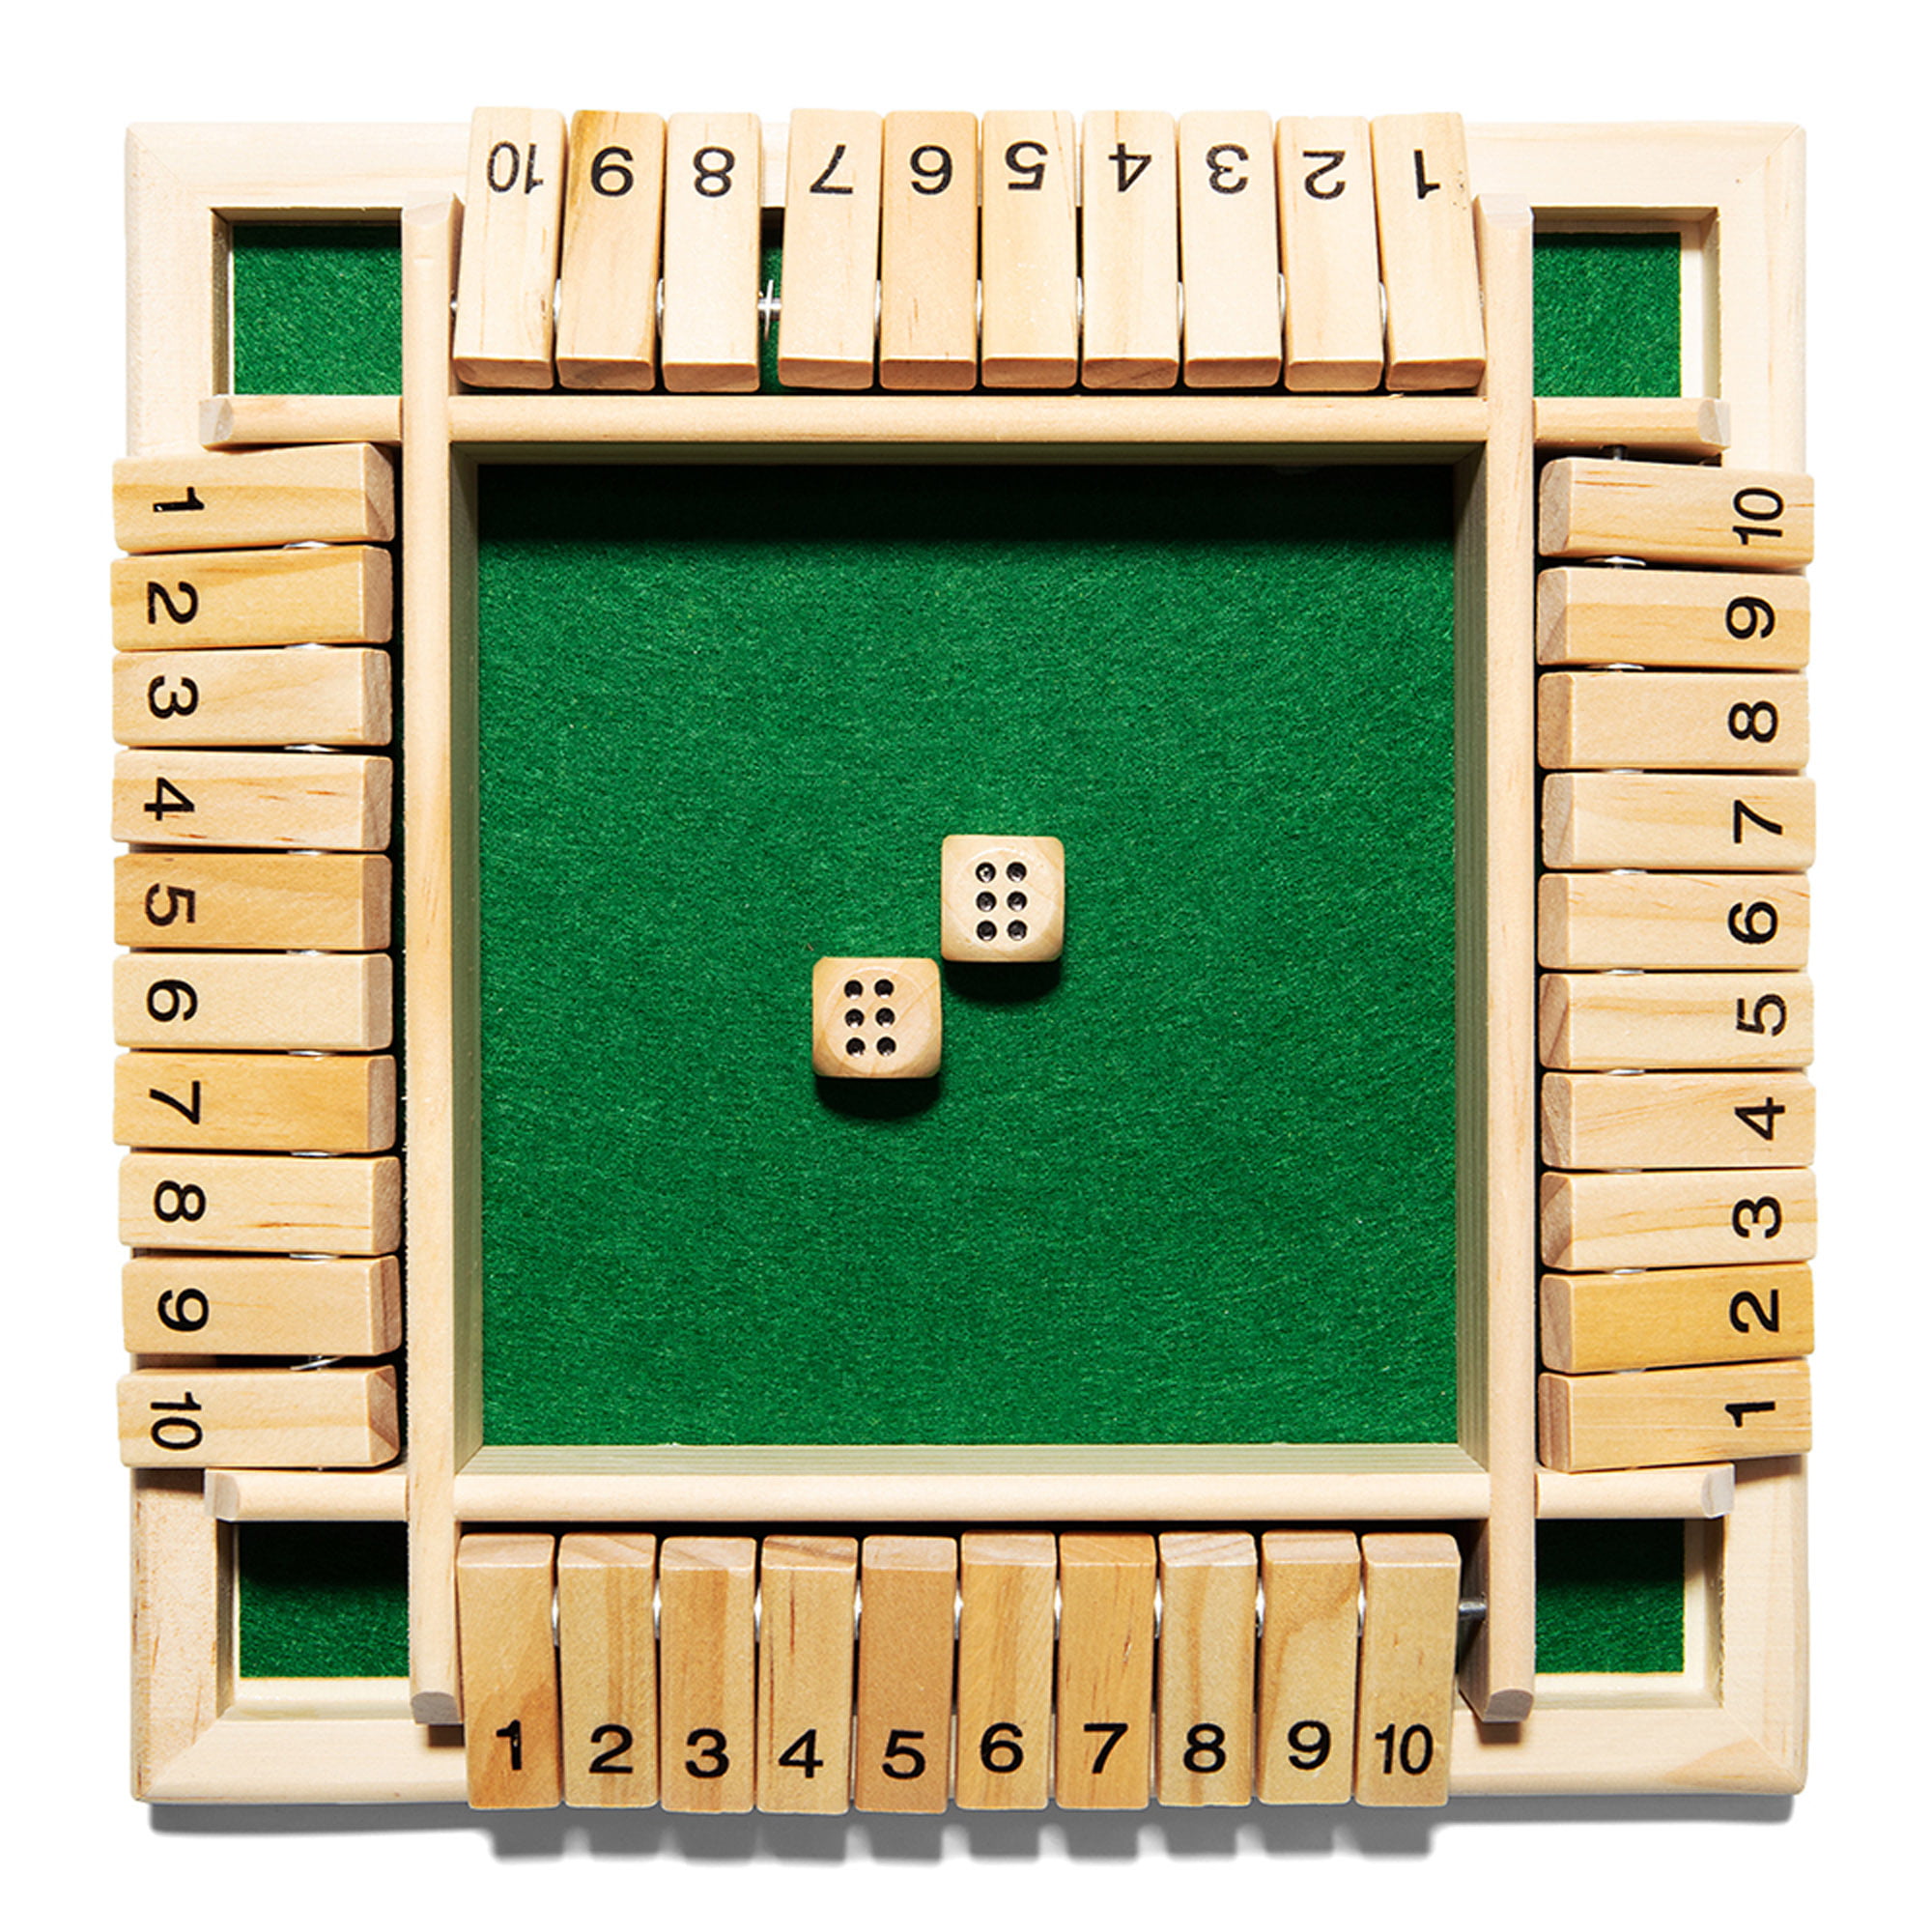 nk-1-4-players-shut-the-box-dice-game-classic-4-sided-wooden-board-game